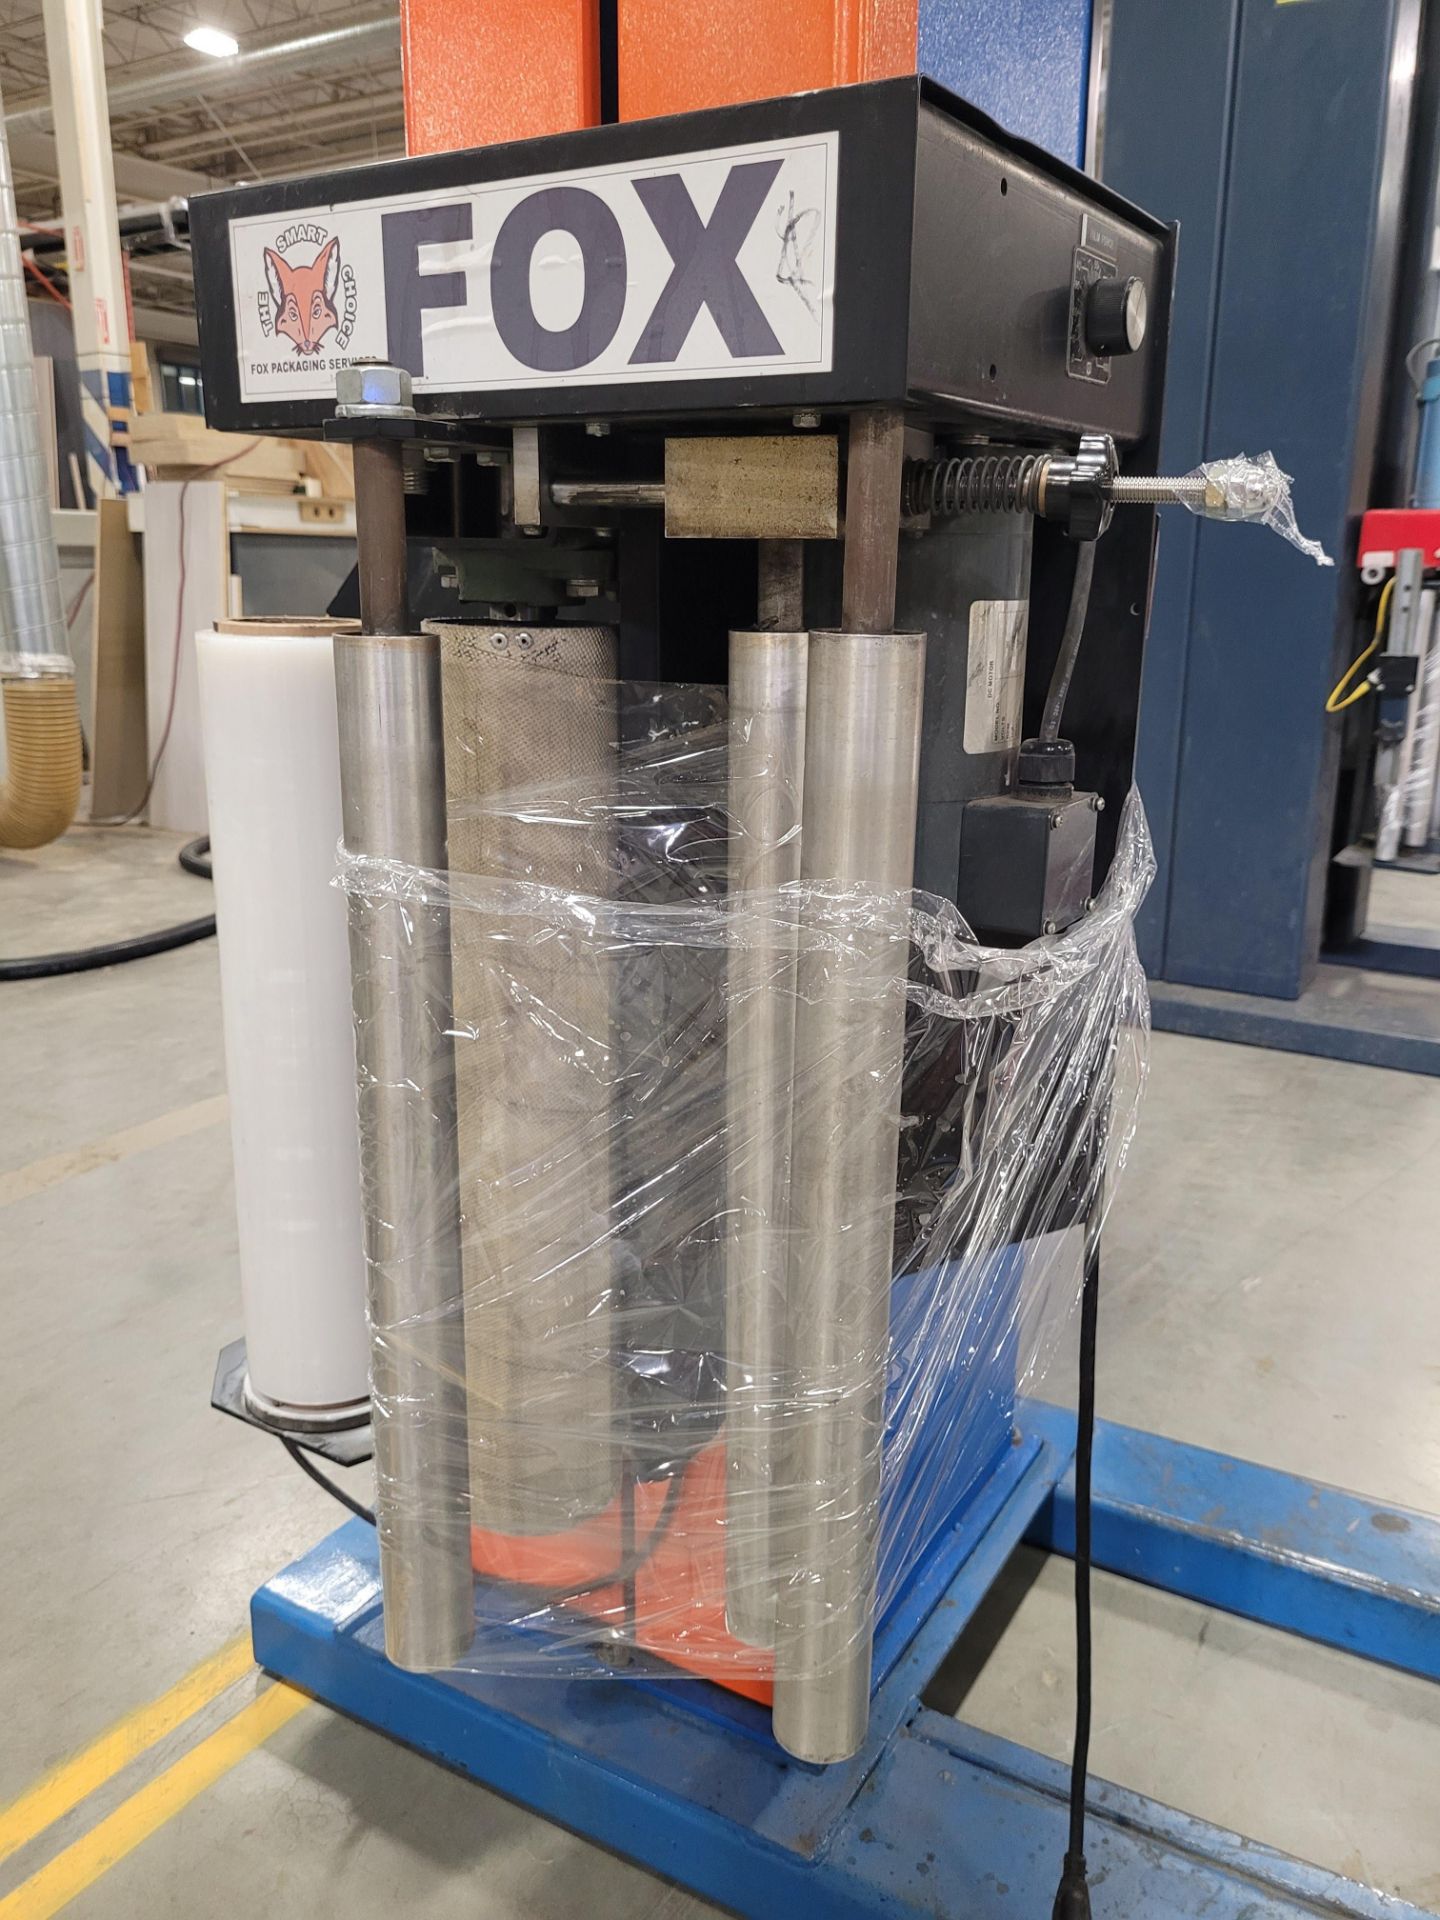 FOX C4 48" TURNTABLE TYPE AUTOMATIC PALLET WRAPPER, S/N: C4-092412-166 - Image 2 of 4